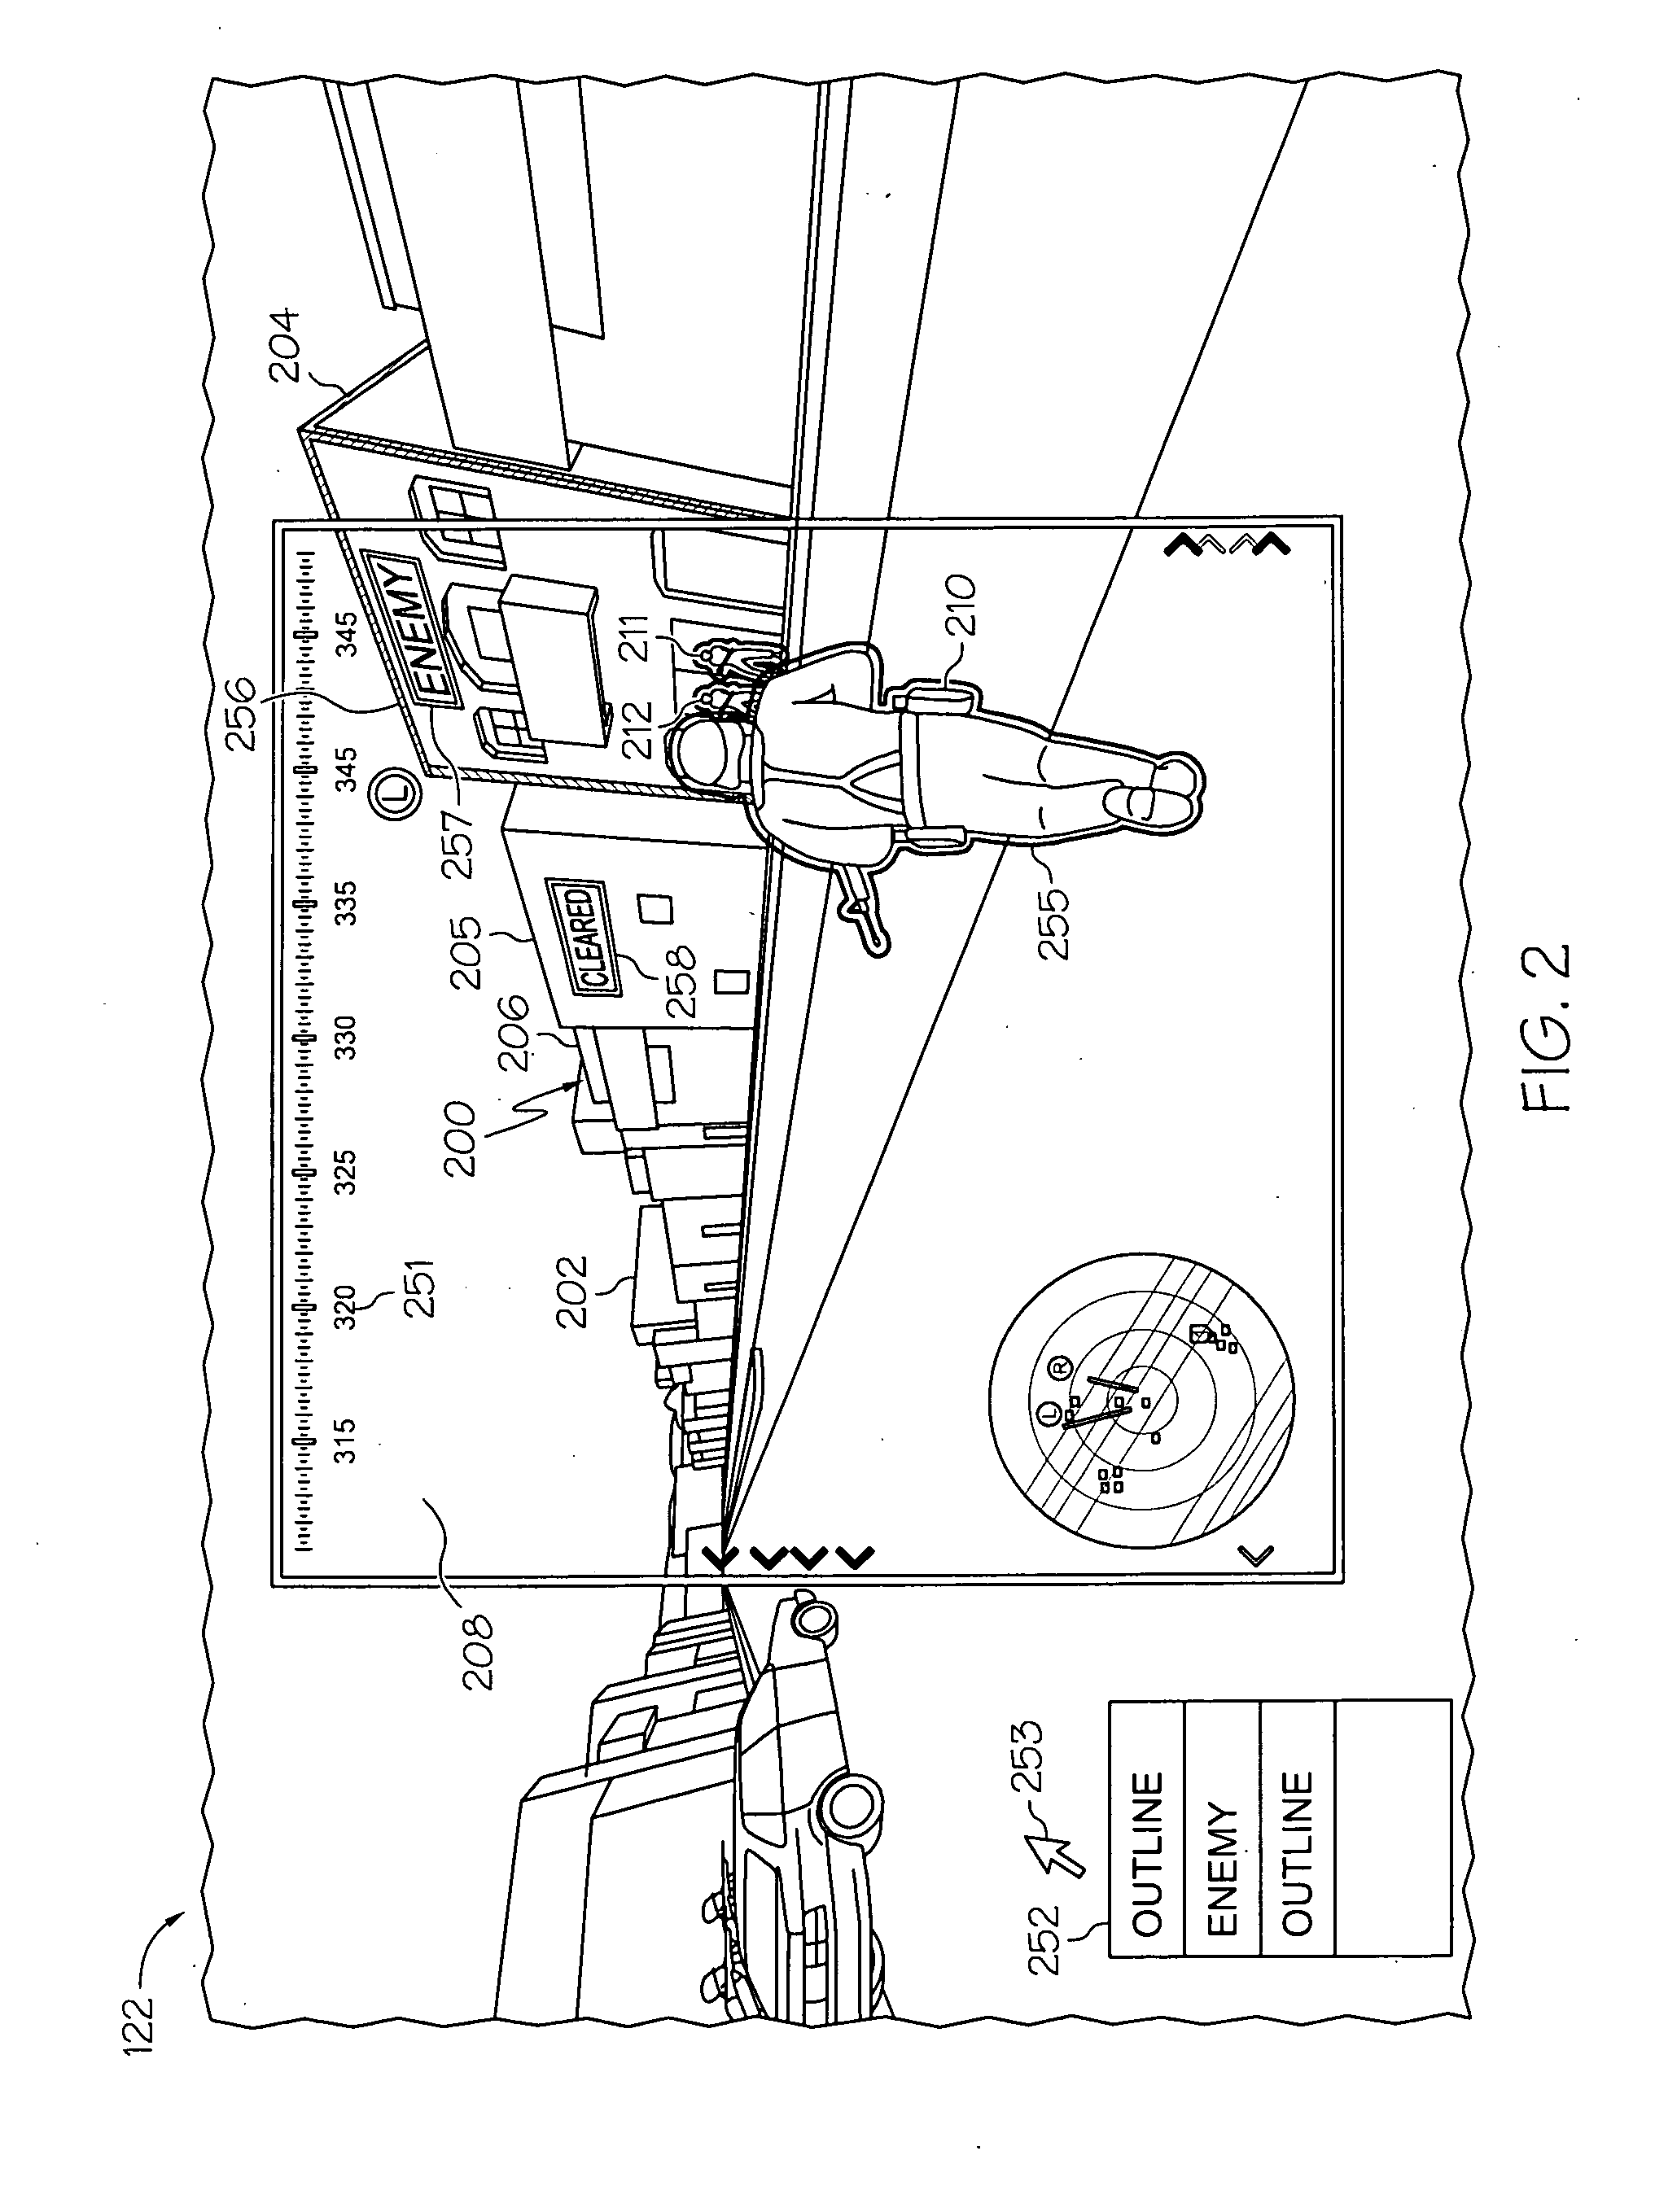 Method and system for displaying conformal symbology on a see-through display